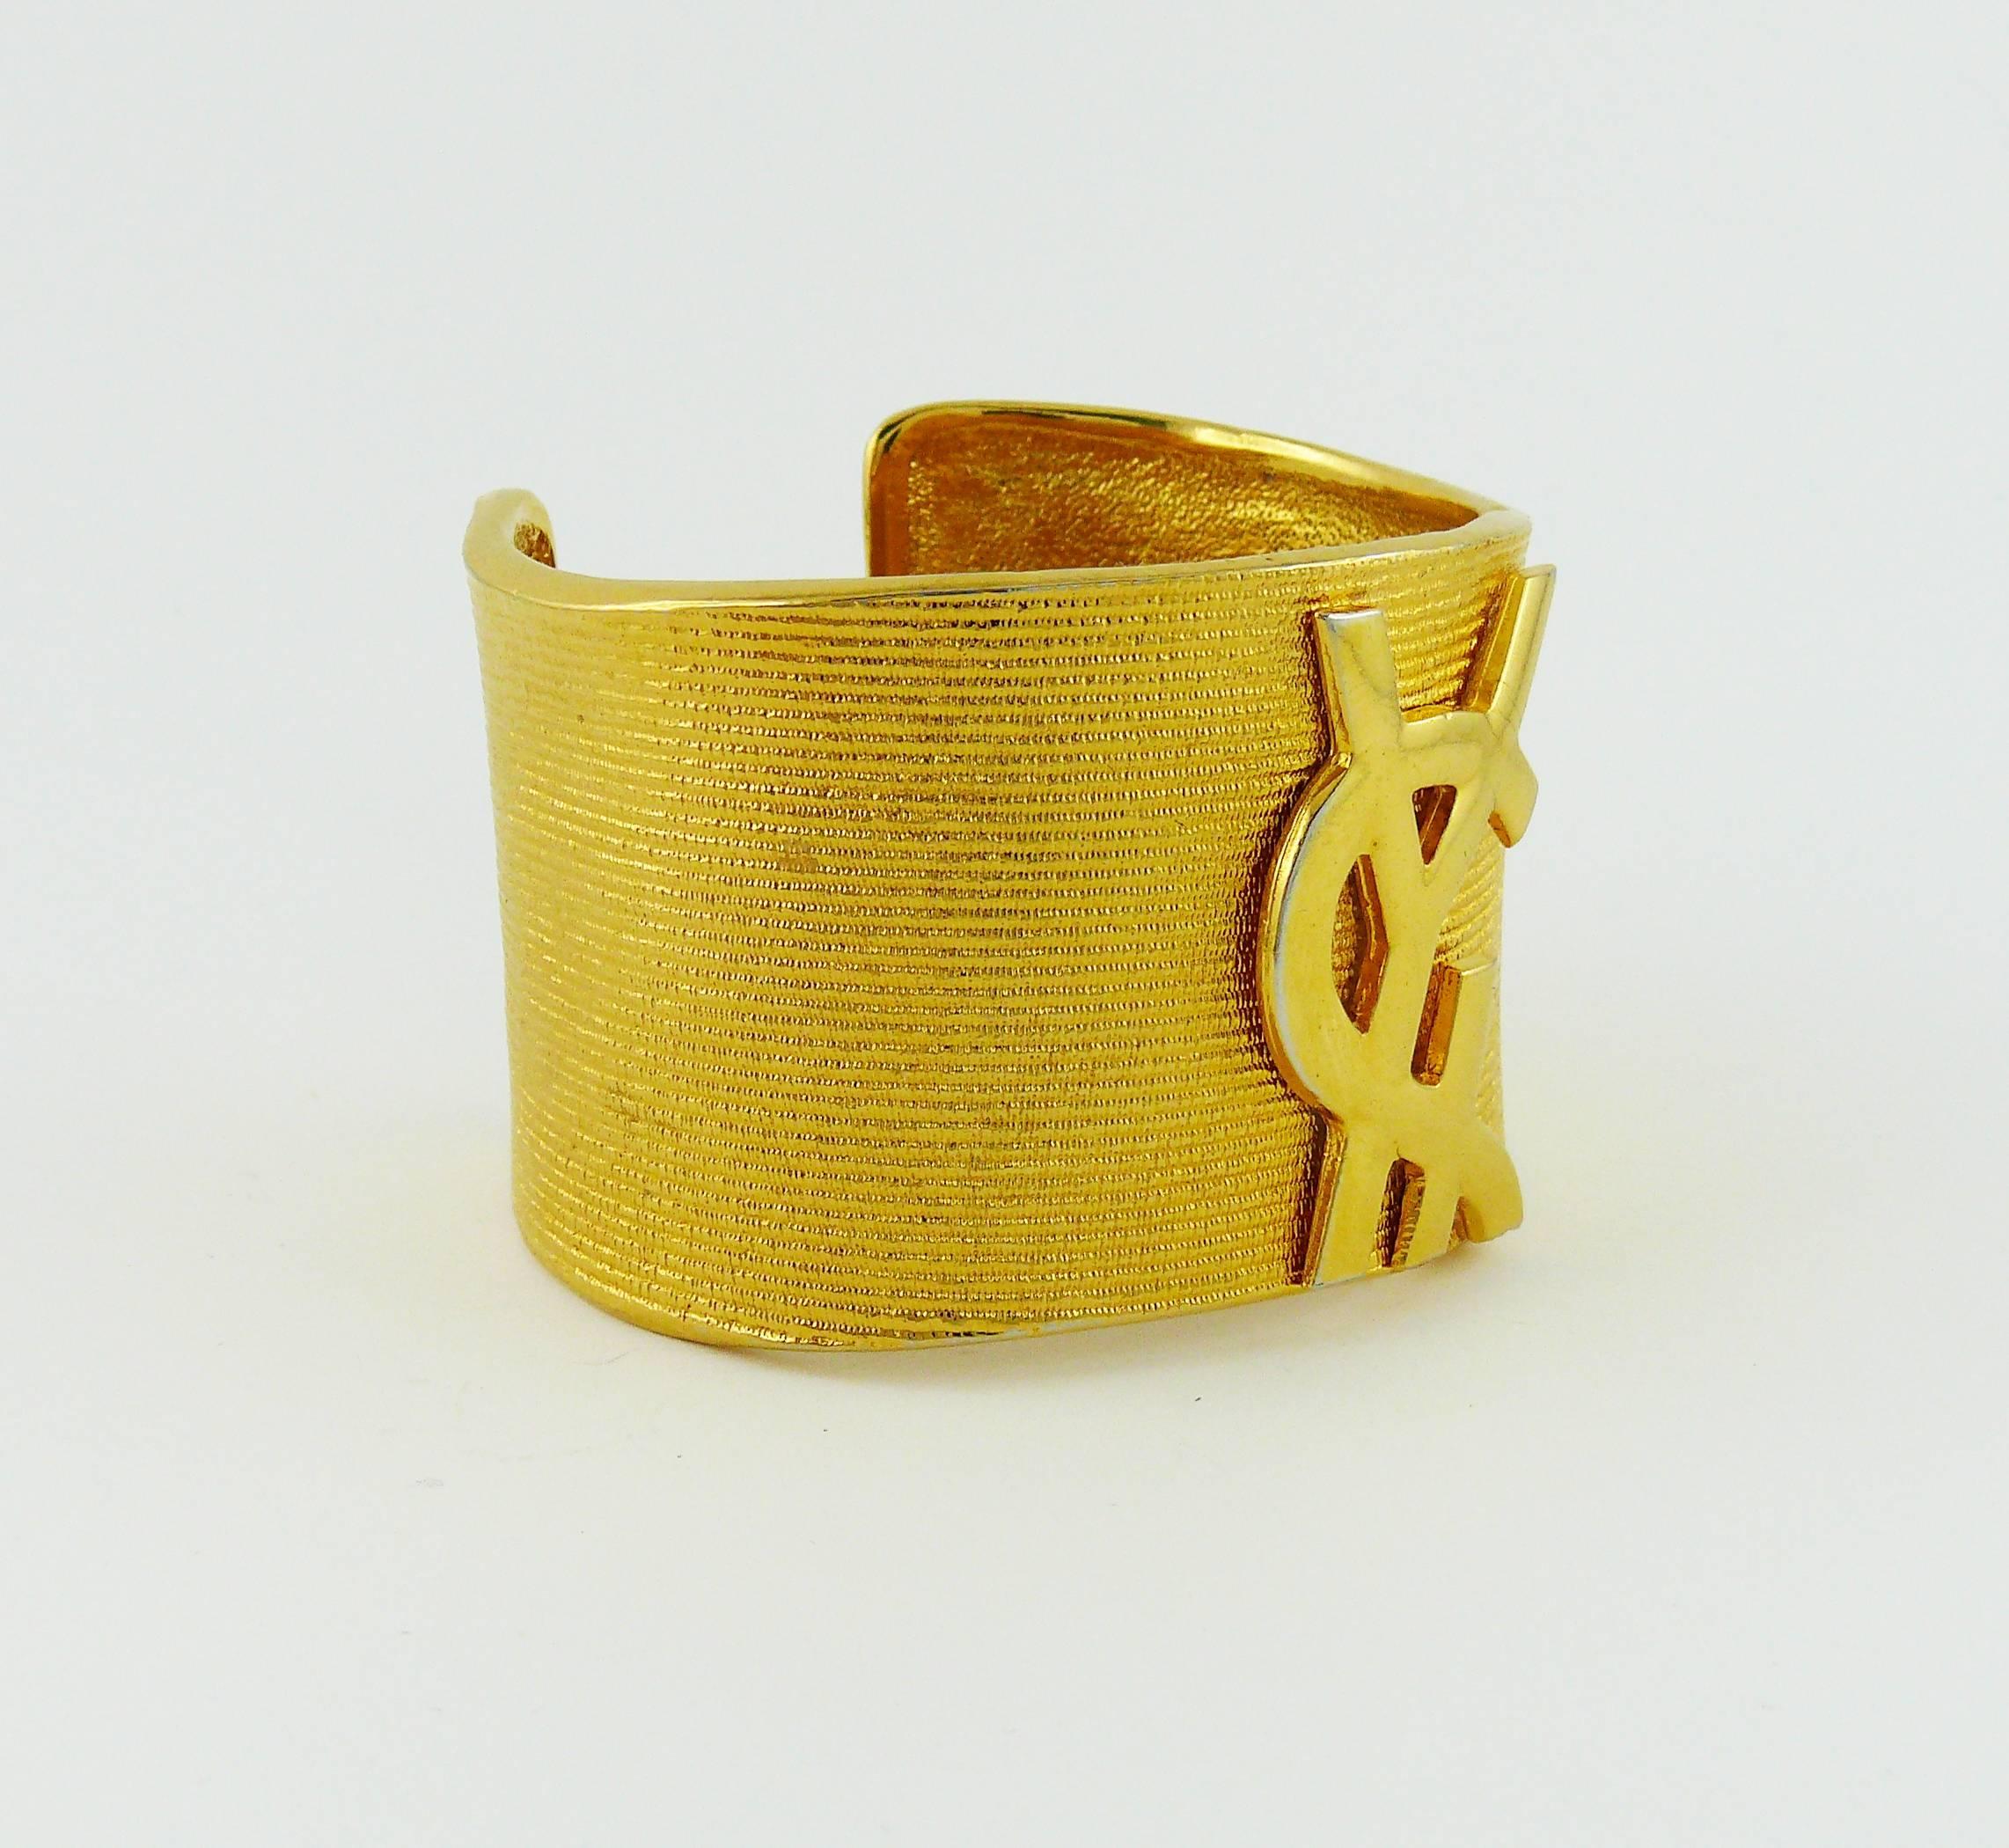 YVES SAINT LAURENT vintage gold tone ribbed textured cuff bracelet featuring a large signature logo at the front.

Embossed YSL Made in France.

Indicative measurements : inside circumference approx. 18.2 cm (7.17 inches) /  width approx. 4 cm